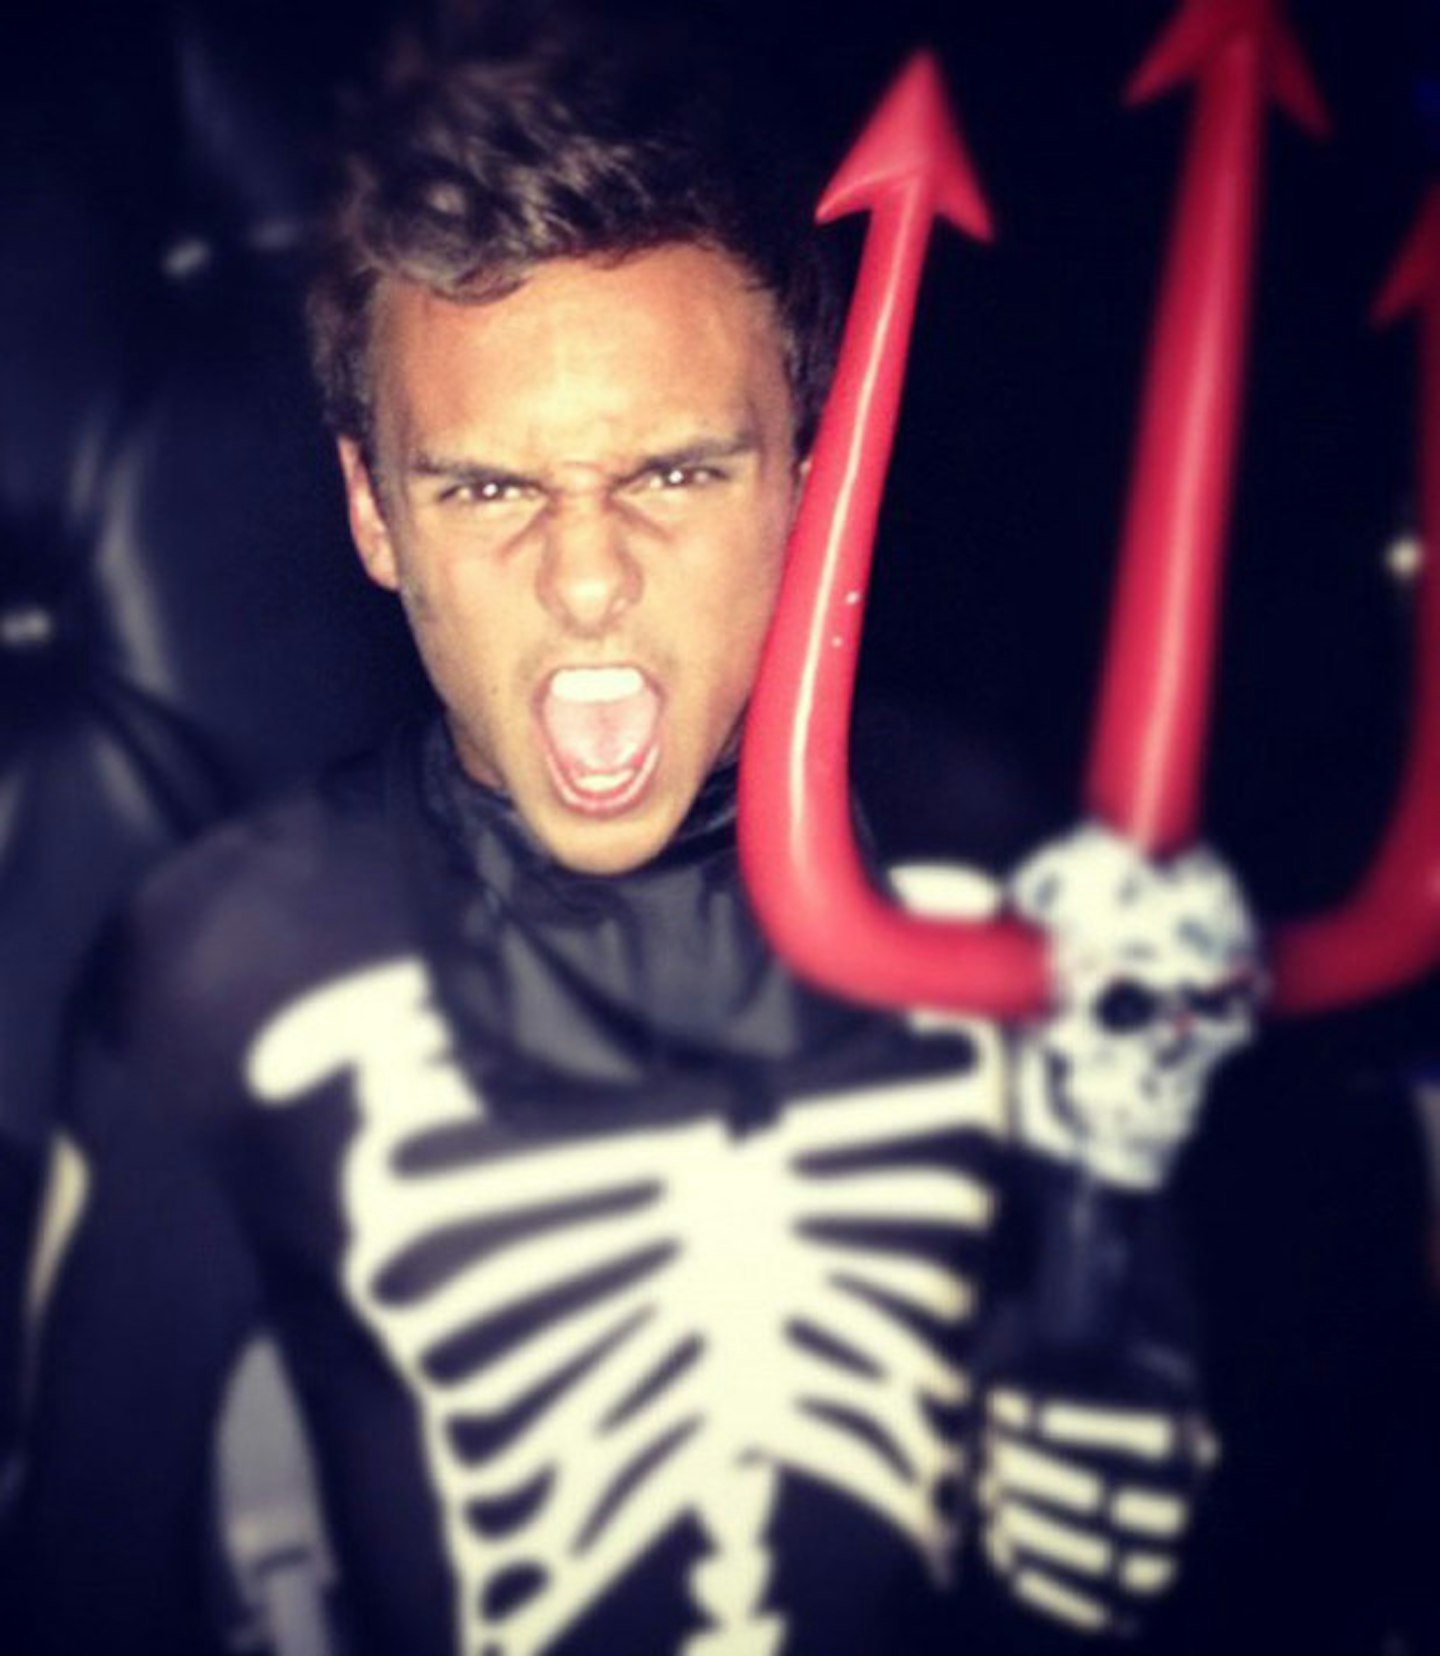 tom-daley-hallowee-devil-picture